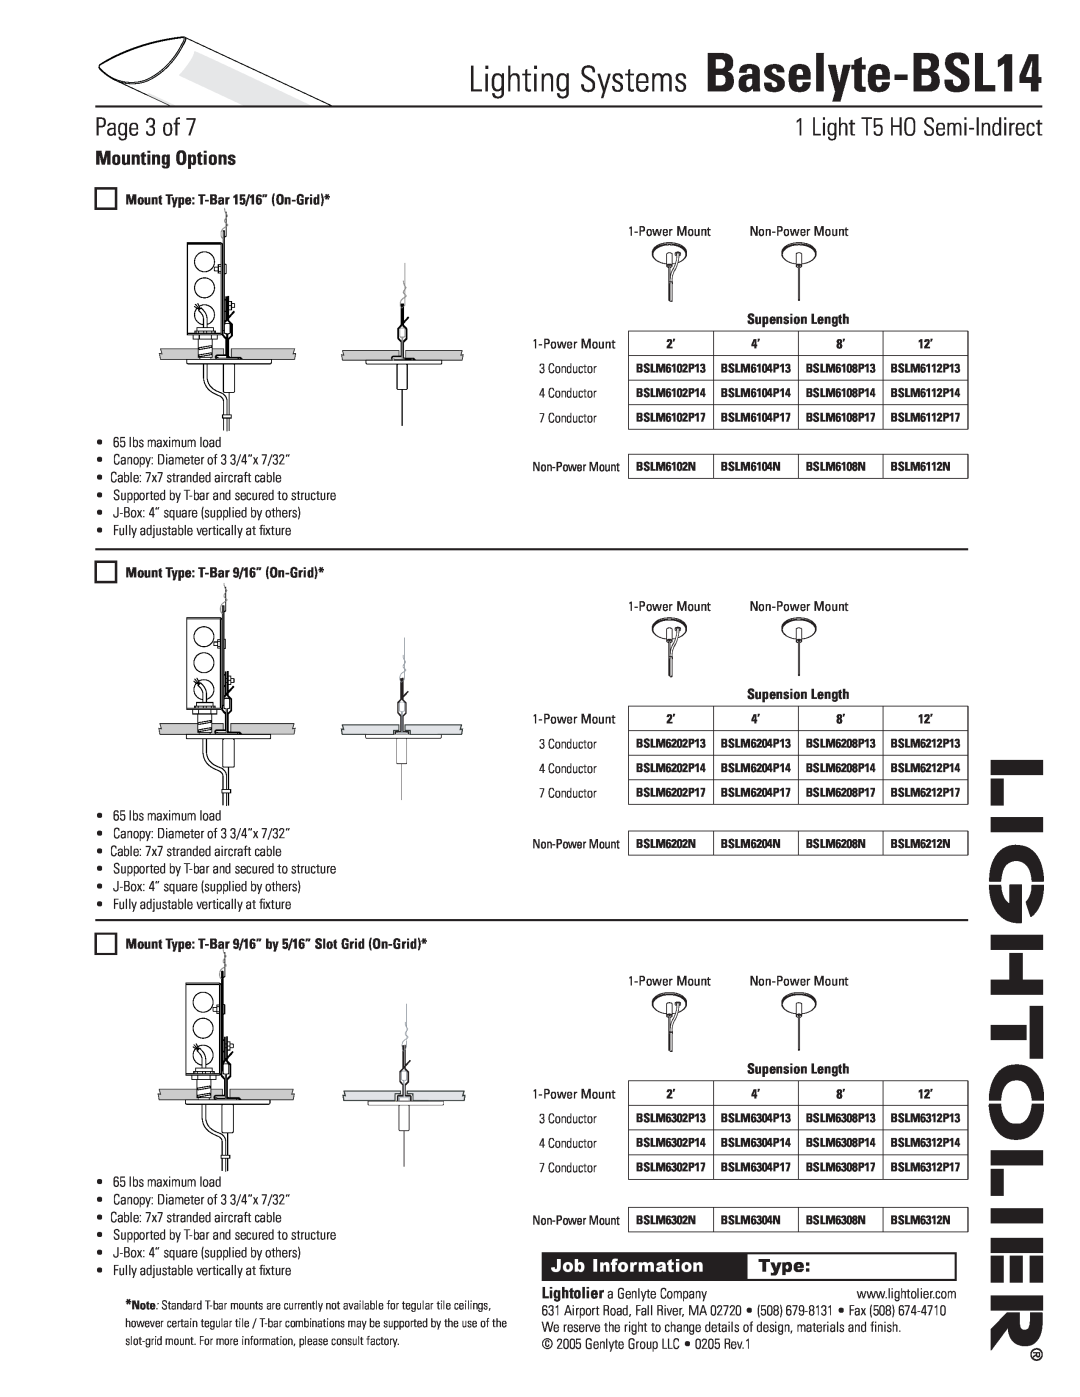 Lightolier Baselyte-BSL14 Mounting Options, Mount Type T-Bar15/16” On-Grid, Supension Length, Page of, Job Information 